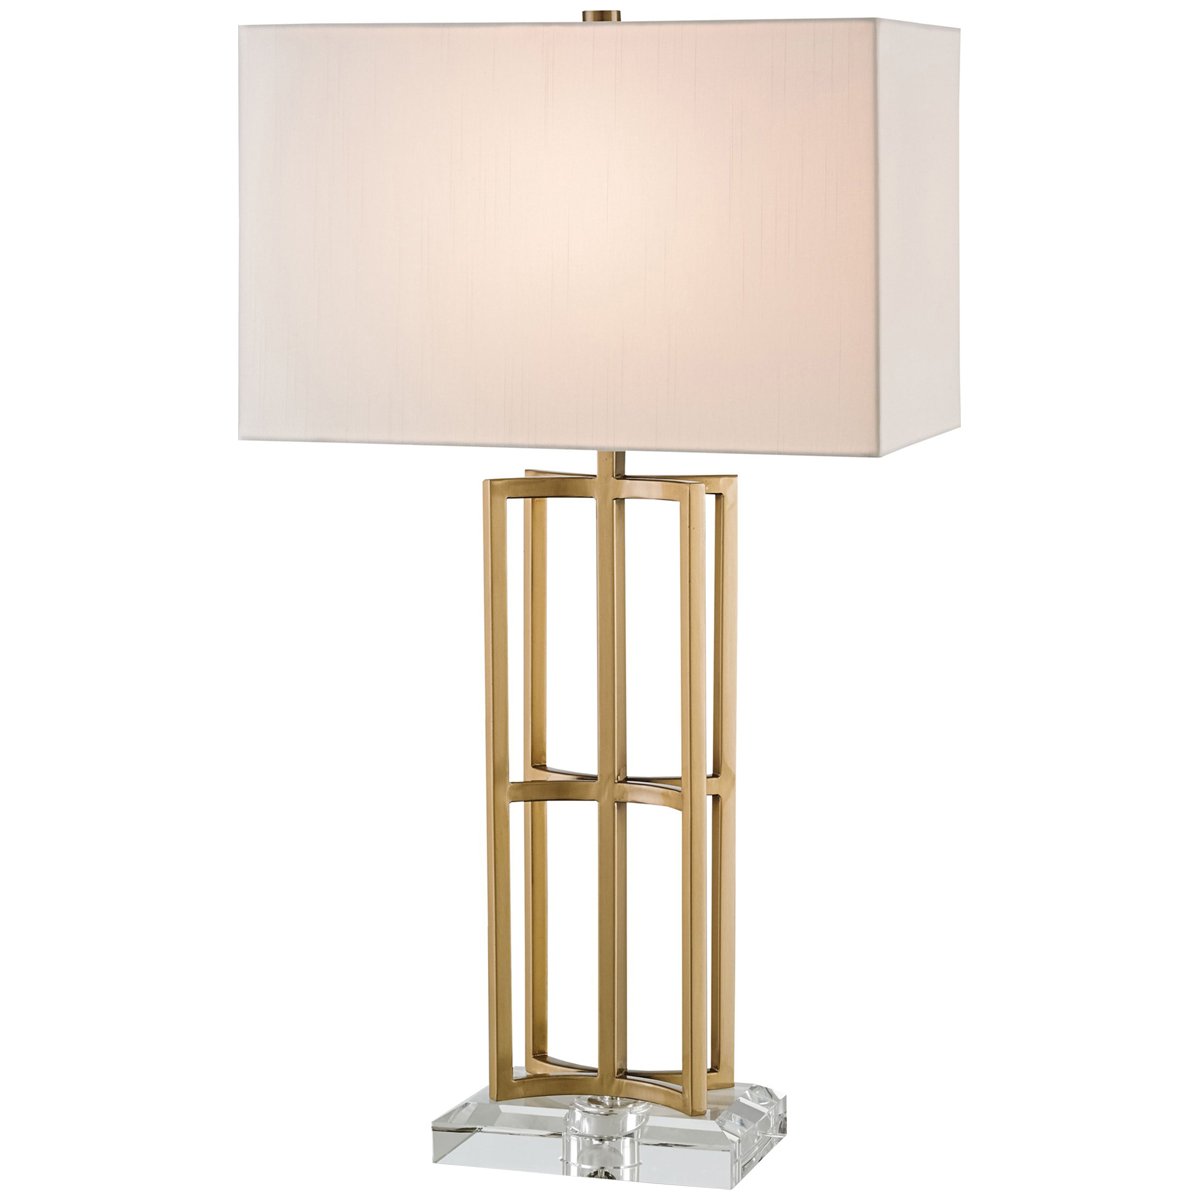 Currey and Company Devonside Table Lamp